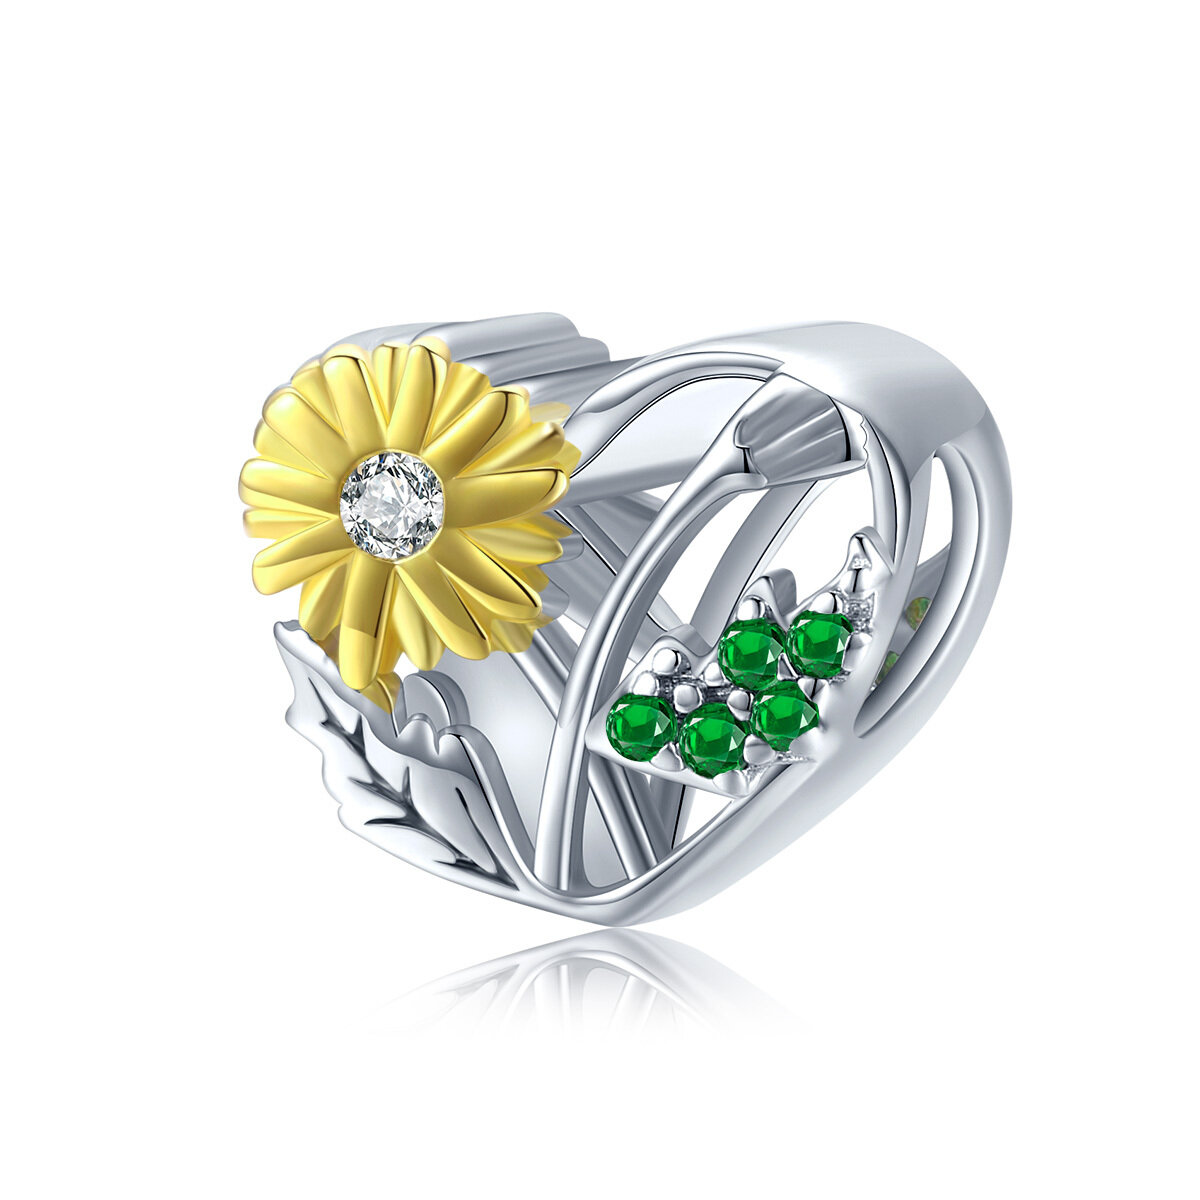 GemKing BSC284 Daisy Story S925 Sterling Silver Charm